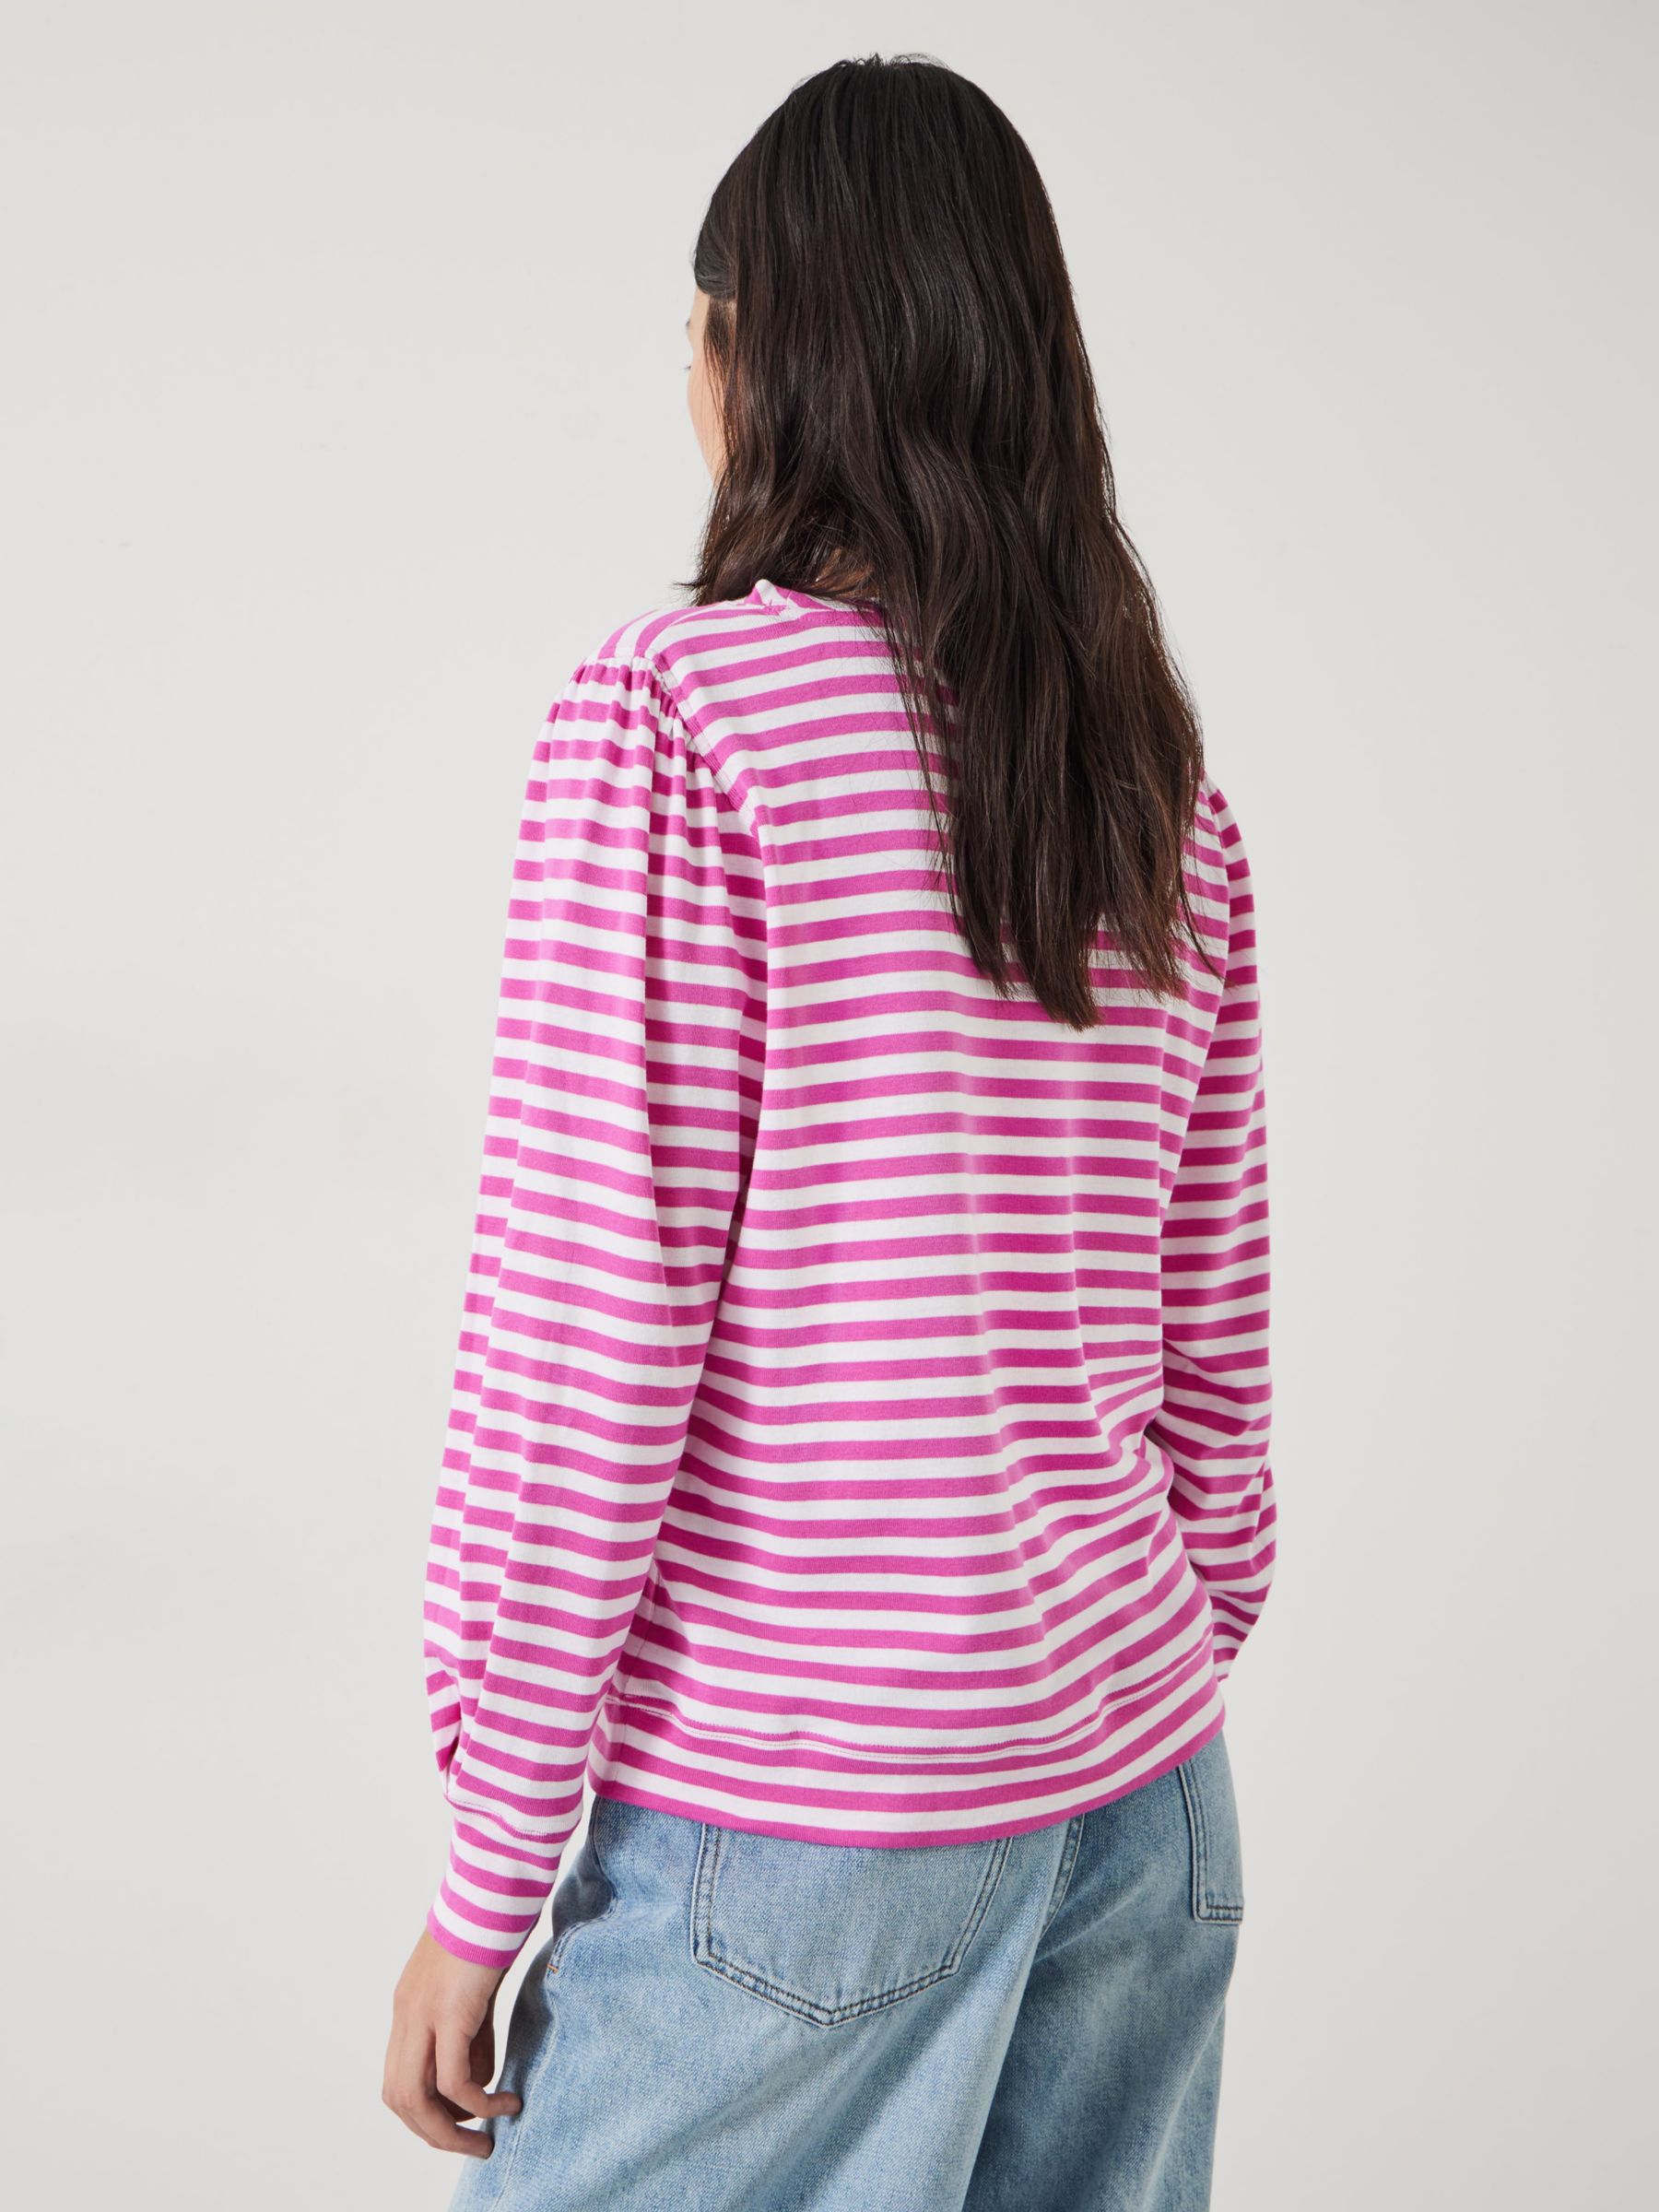 Buy HUSH Emily Striped Puff Sleeve Top Online at johnlewis.com